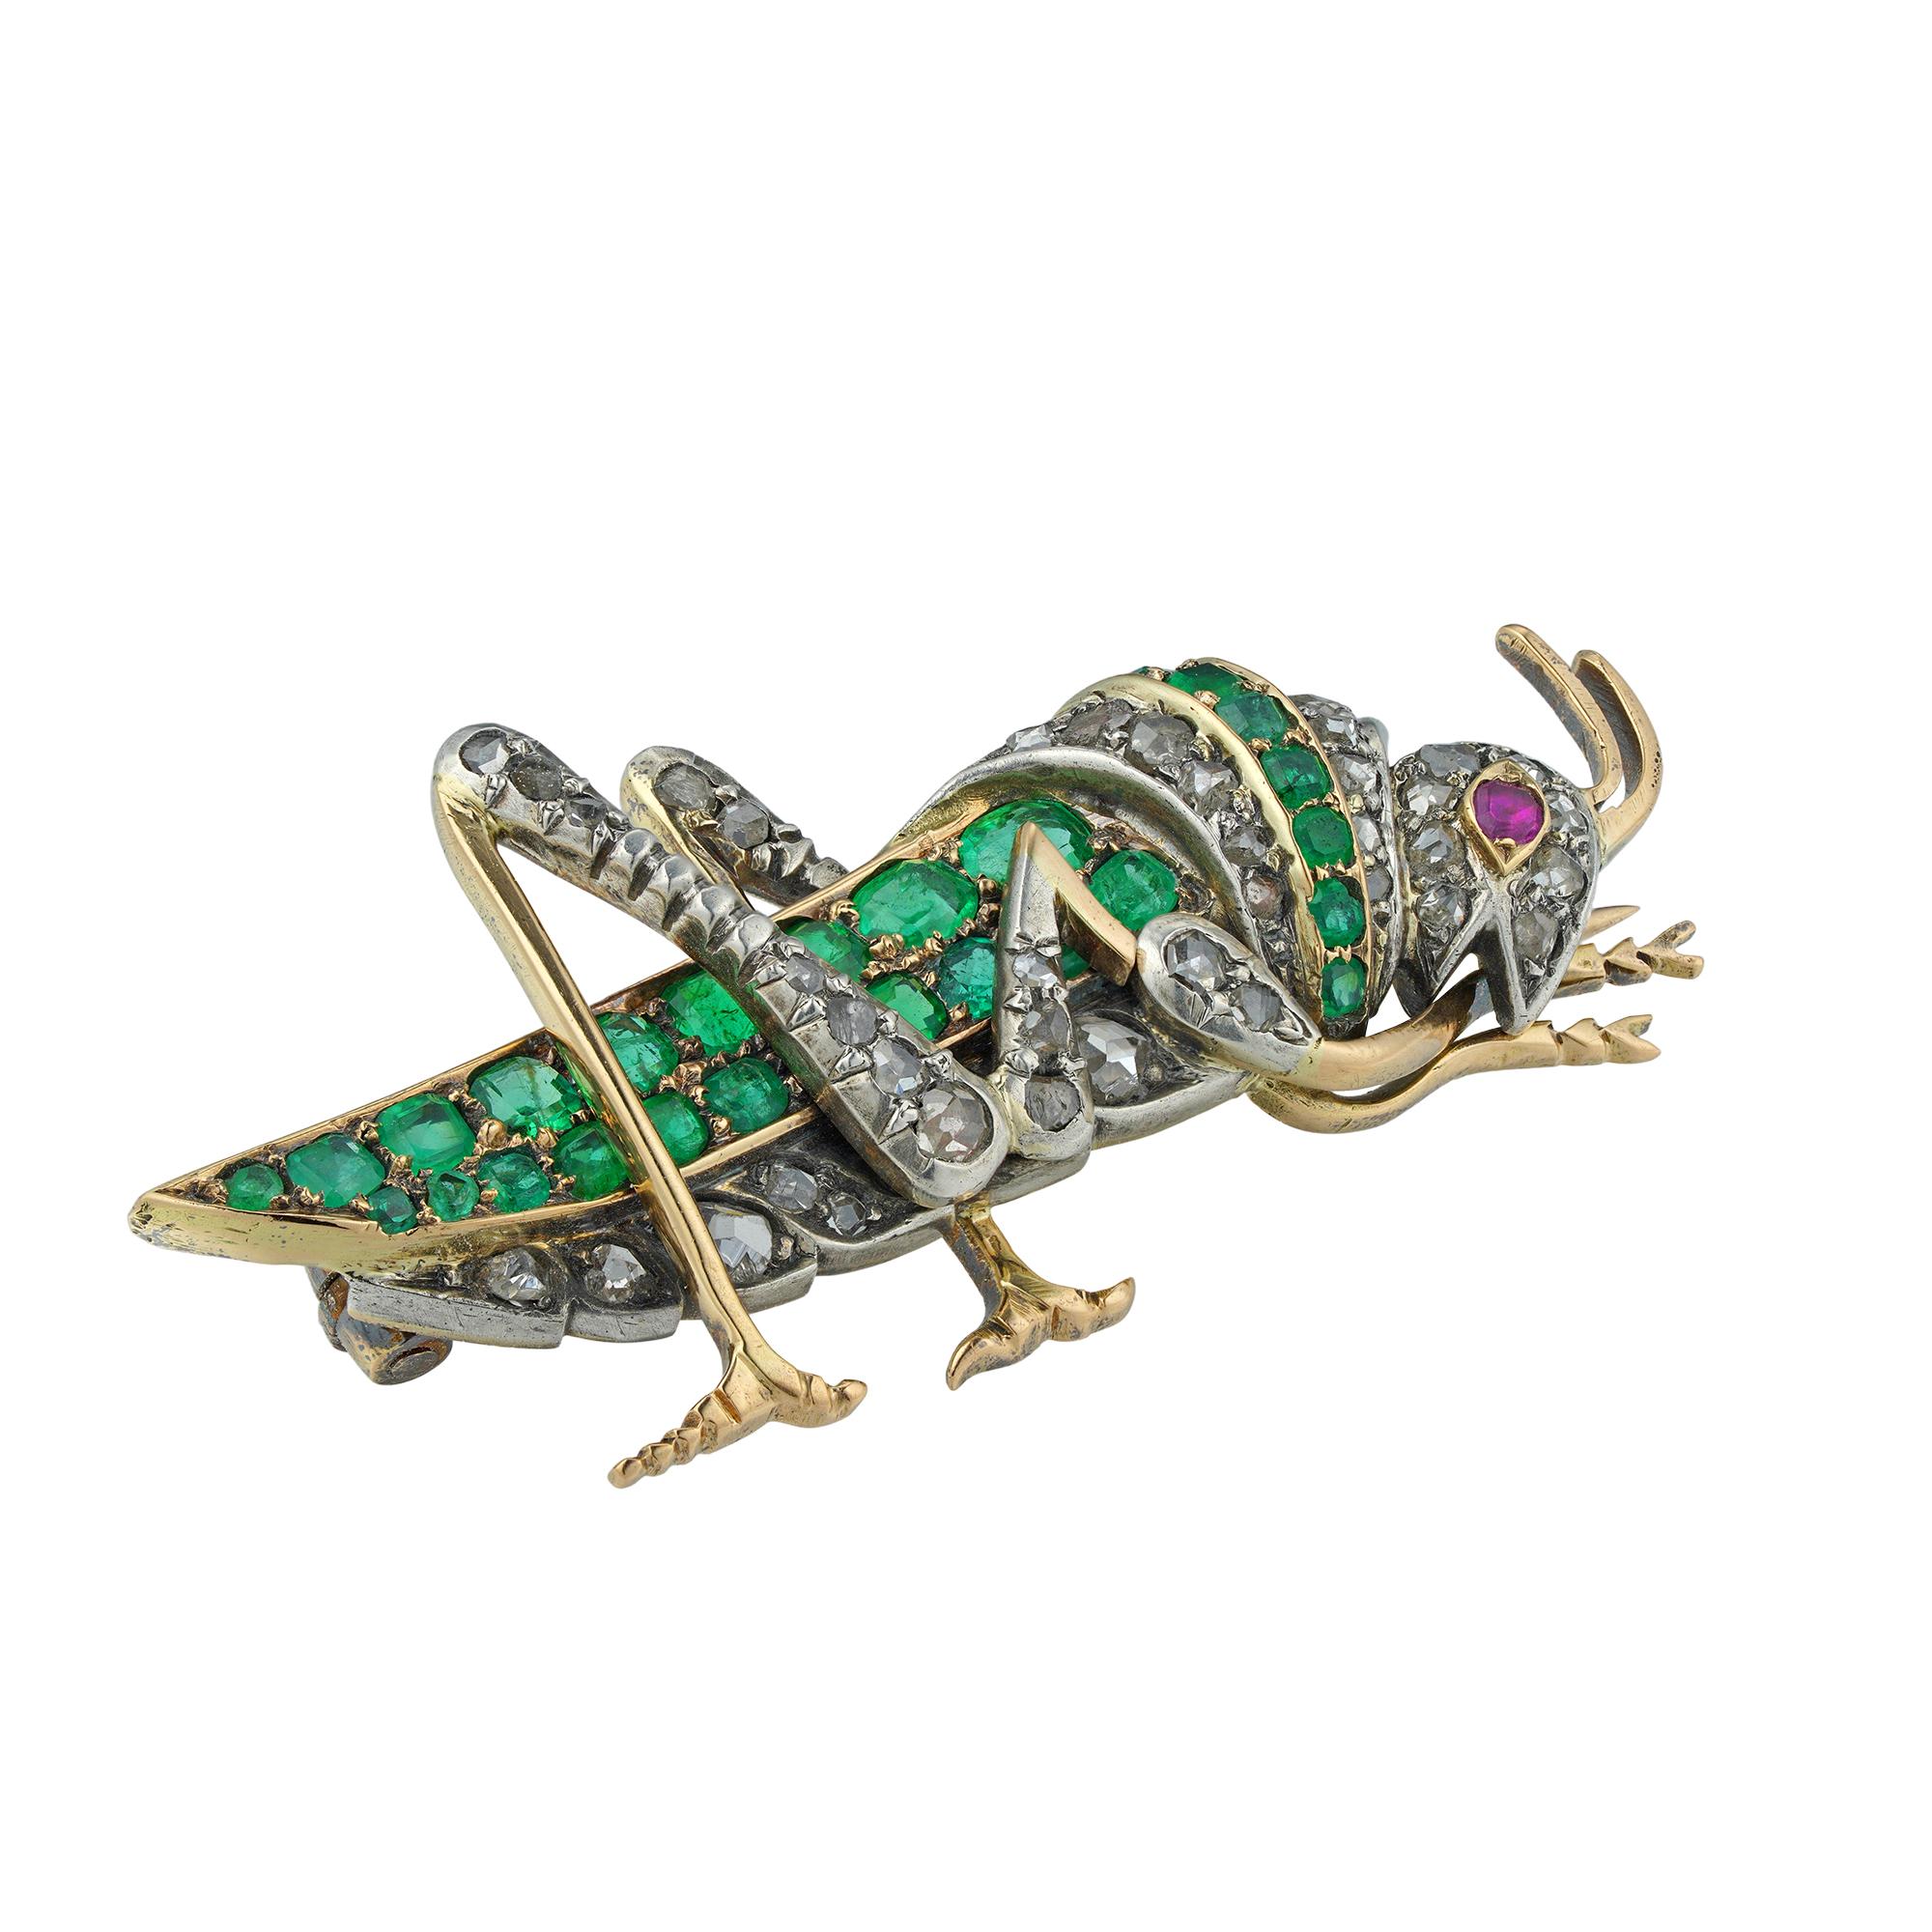 A Victorian emerald, ruby and diamond grasshopper brooch, the body, legs and head encrusted with thirty-five rose-cut diamonds estimated to weigh 0.4 carats, and twenty-seven square-cut emeralds, estimated to weigh 1.2 carats, a round faceted ruby